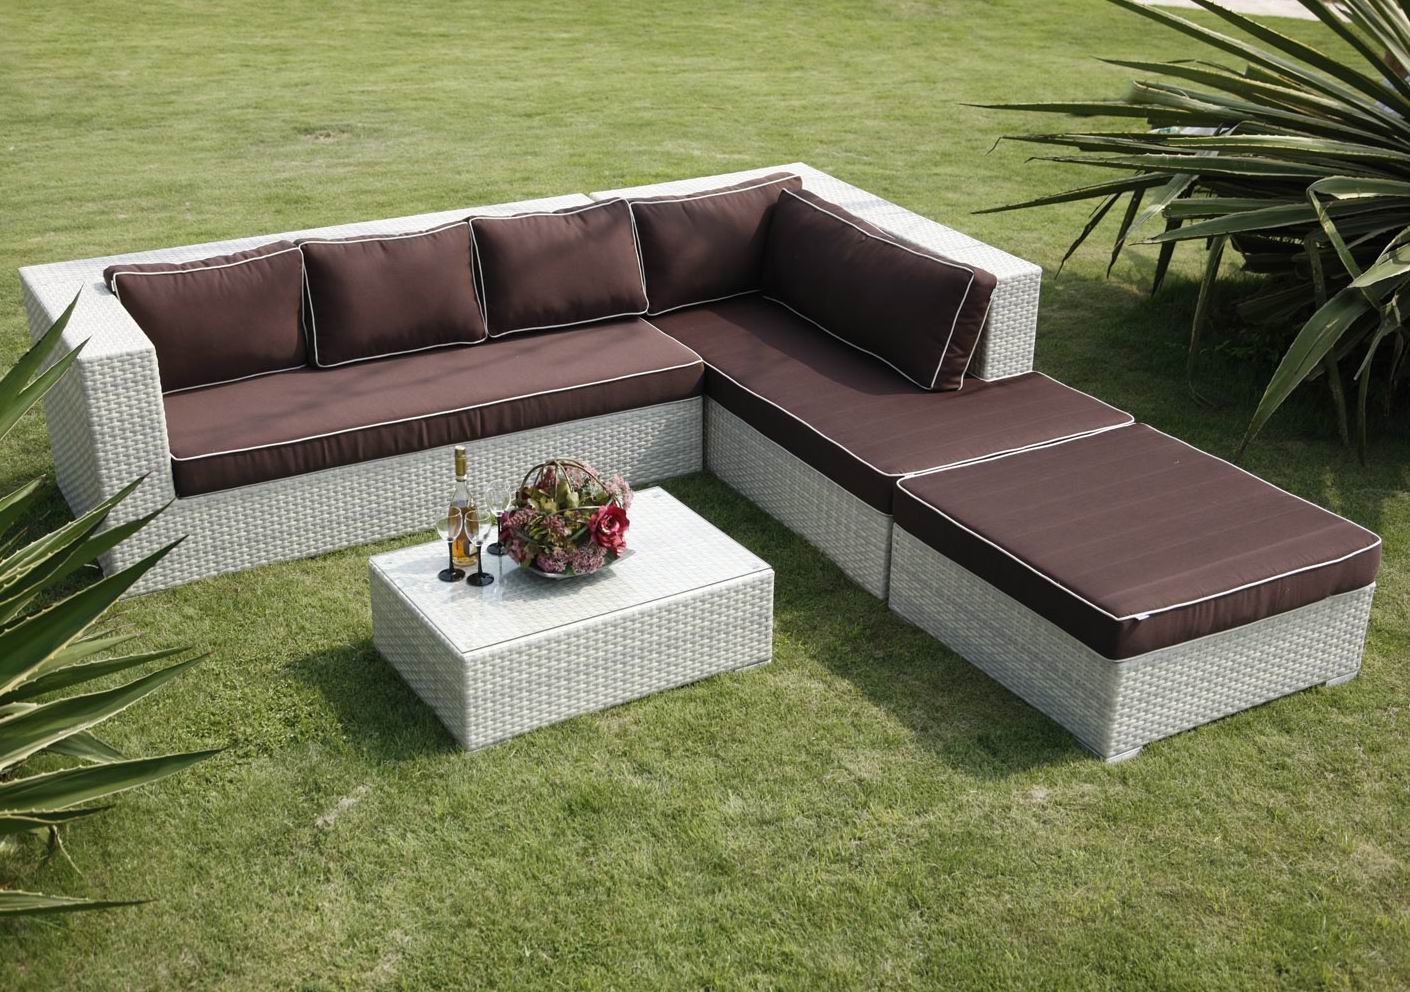 Plastic Wicker Patio Furniture Inspired Outdoor Decorations